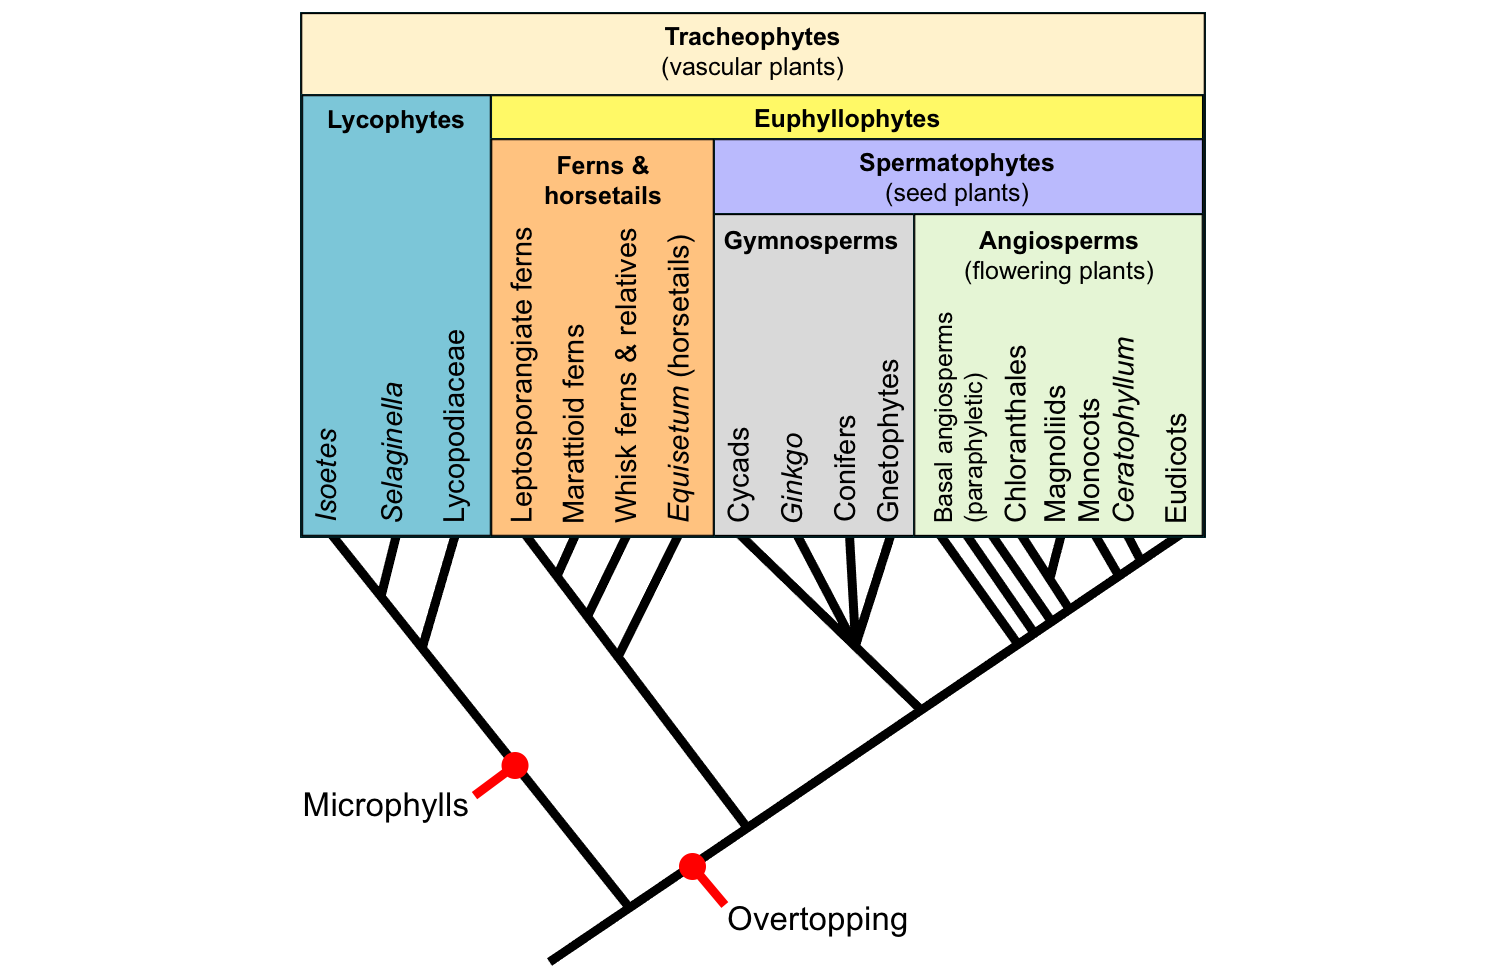 Diagram showing living vascular plant relationships with mapped synapomorphies. Origin of microphylls unites the lycophytes. Origin of overtopping unites the euphyllophytes.